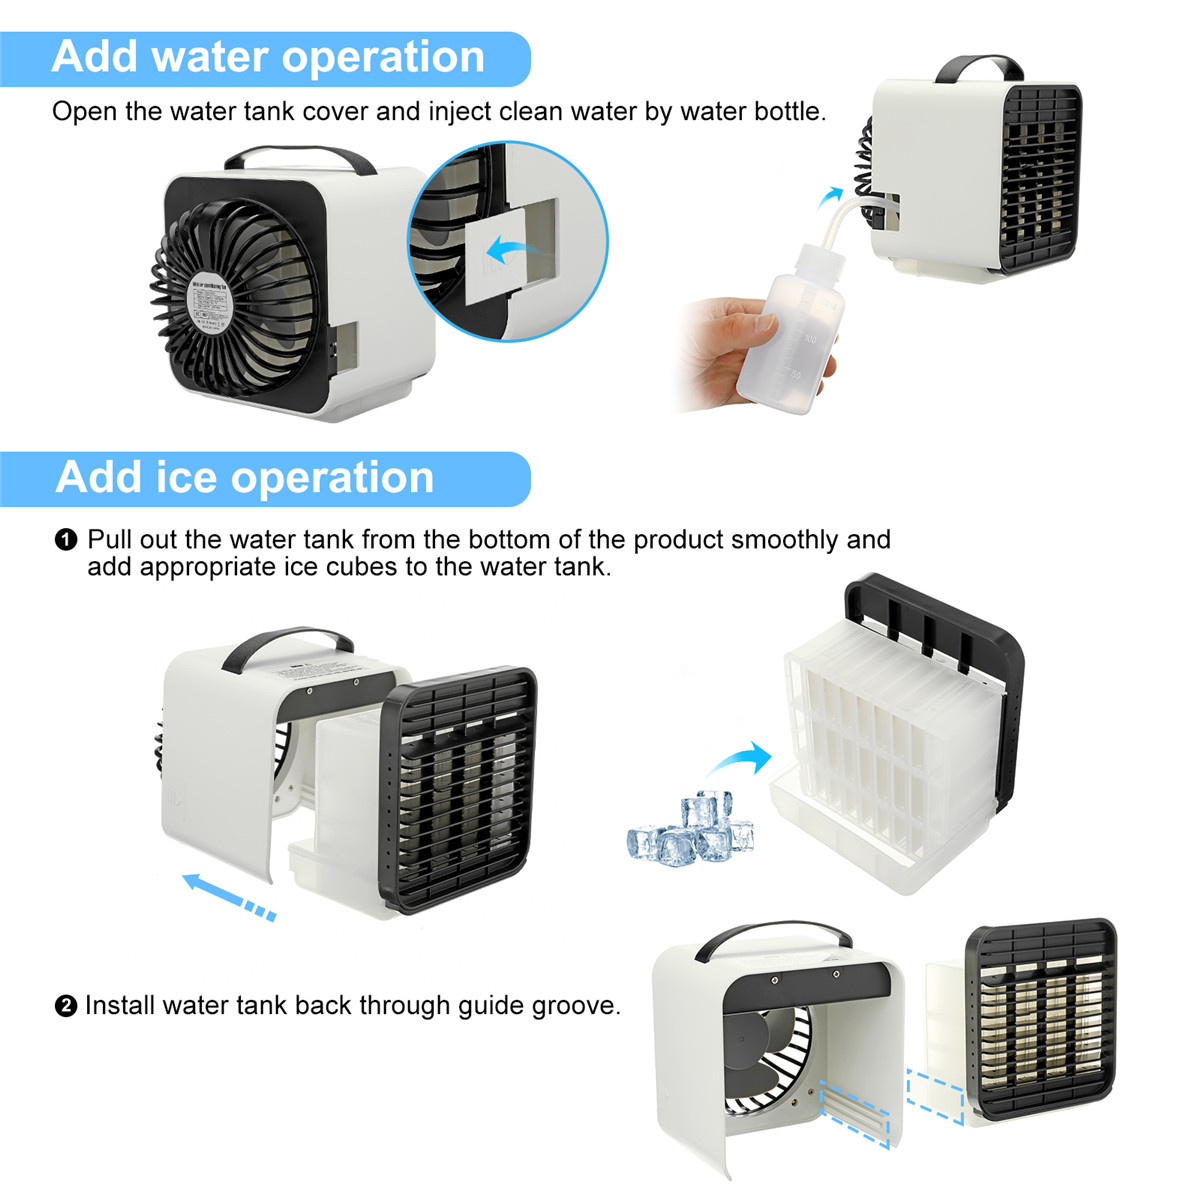 4-in-1-Mini-Air-Cooler-Portable-USB-Air-Conditioning-2000mAh-Cooling-Fan-3-Wind-Speed-Adjustment-Nig-1885394-6